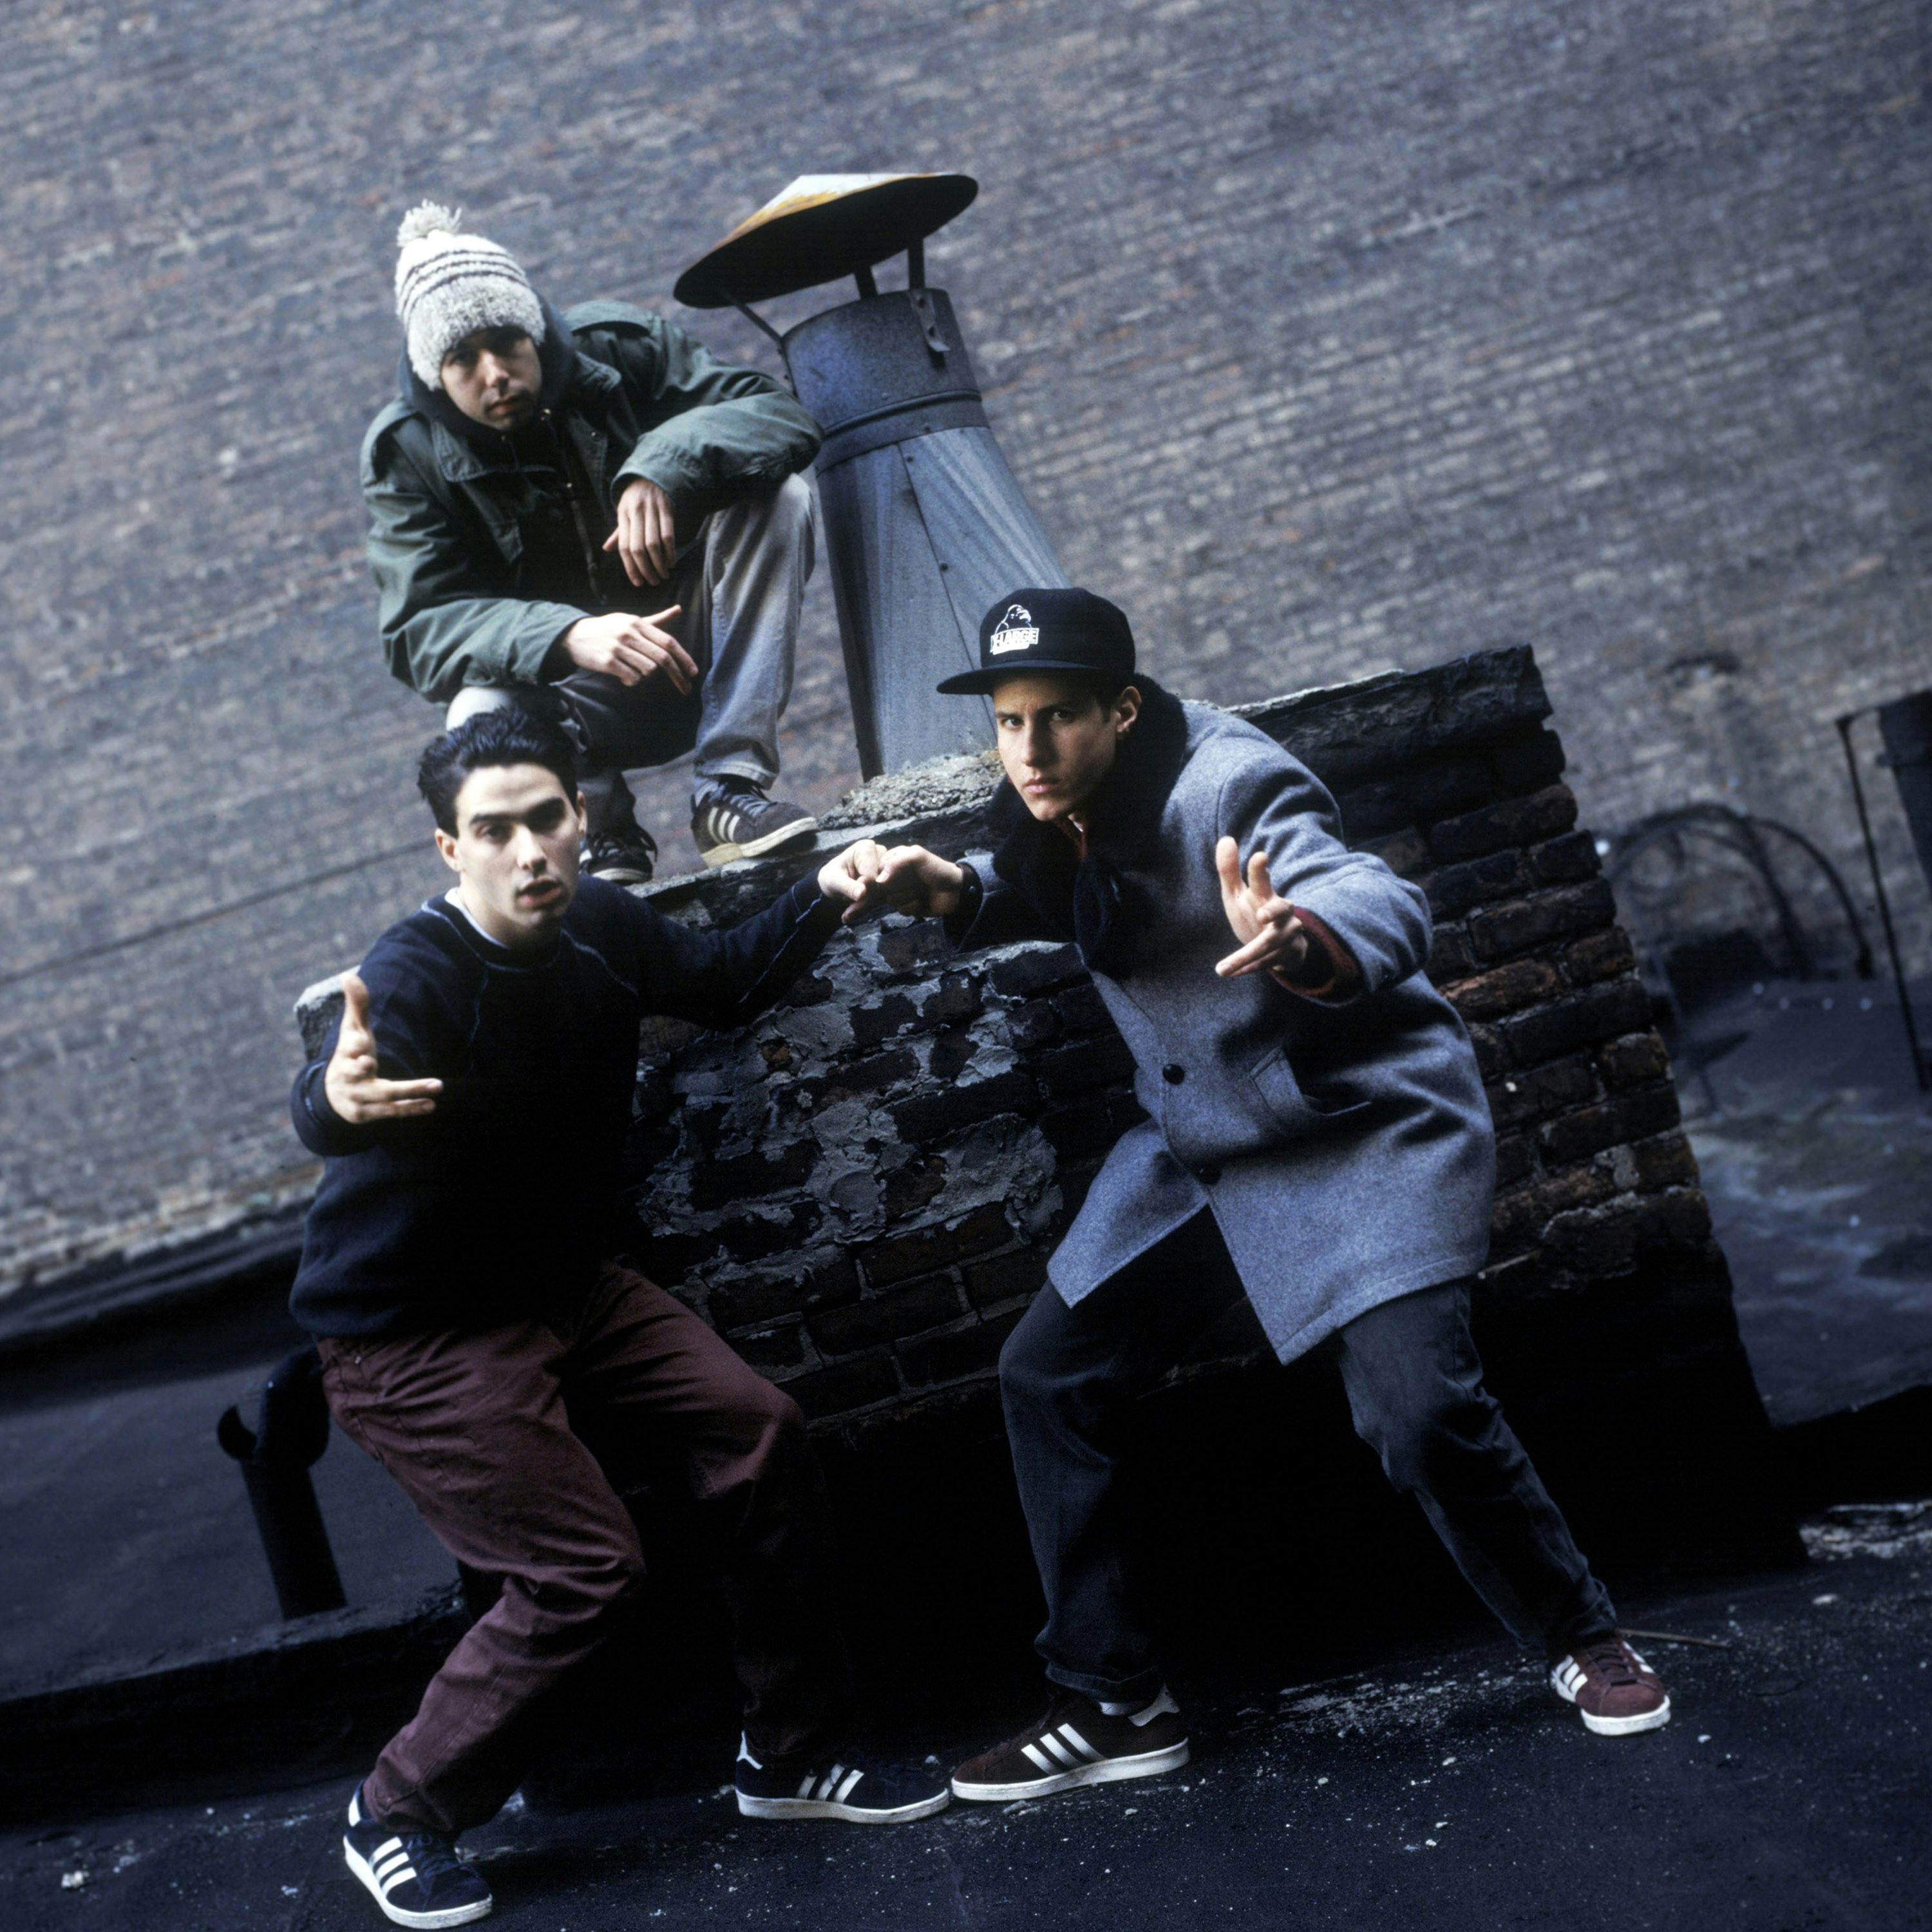 Ad-Rock, MCA and Mike D, of Beastie Boys New York, New
York, 1994